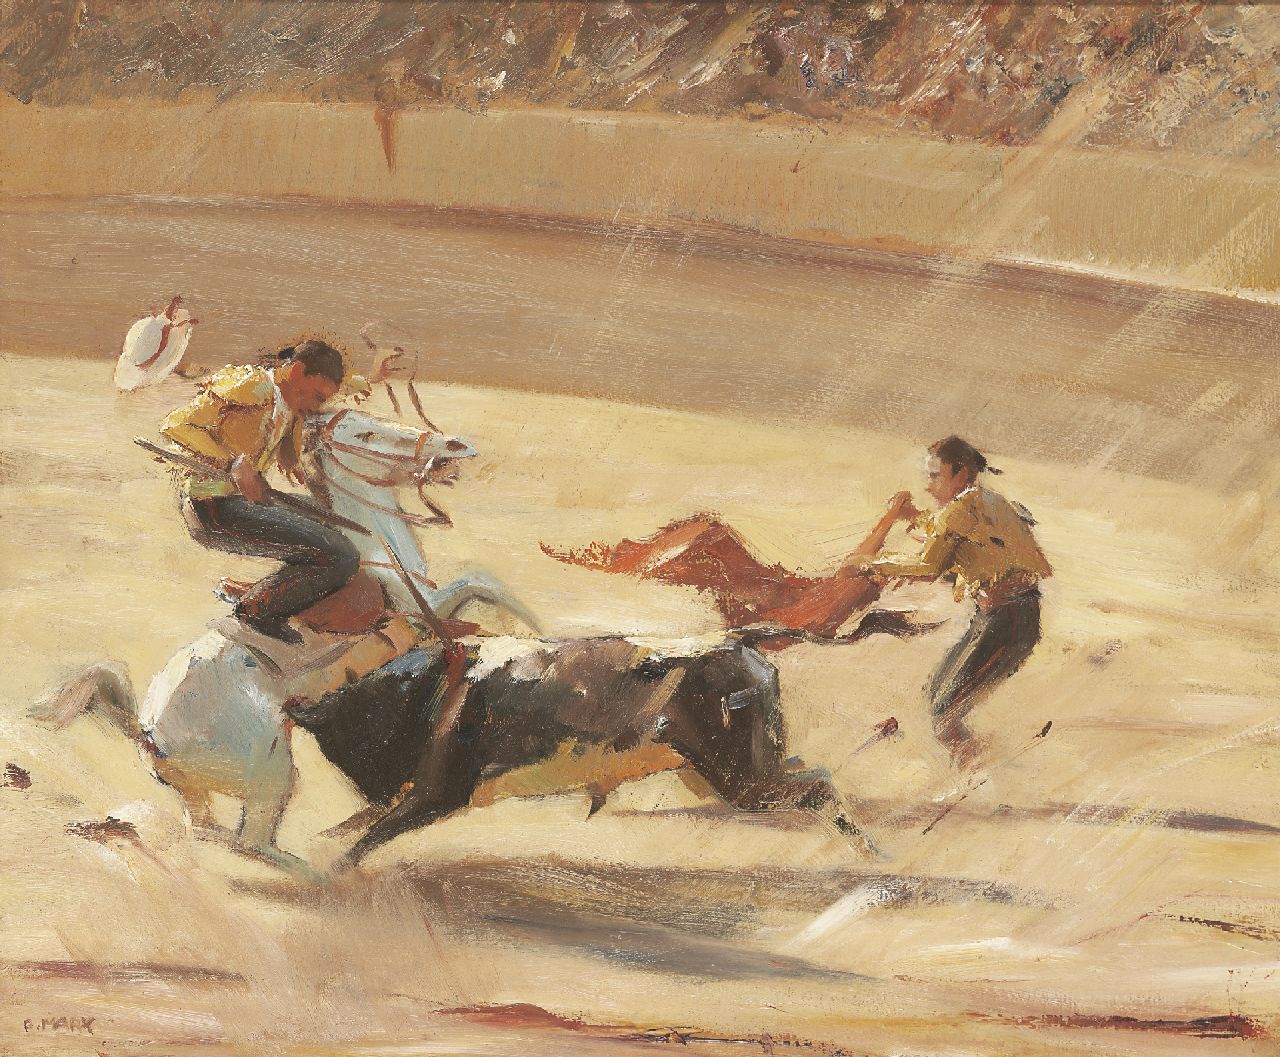 Marx F.  | Franz Marx | Paintings offered for sale | Bullfight, oil on canvas 49.2 x 60.3 cm, signed l.r.